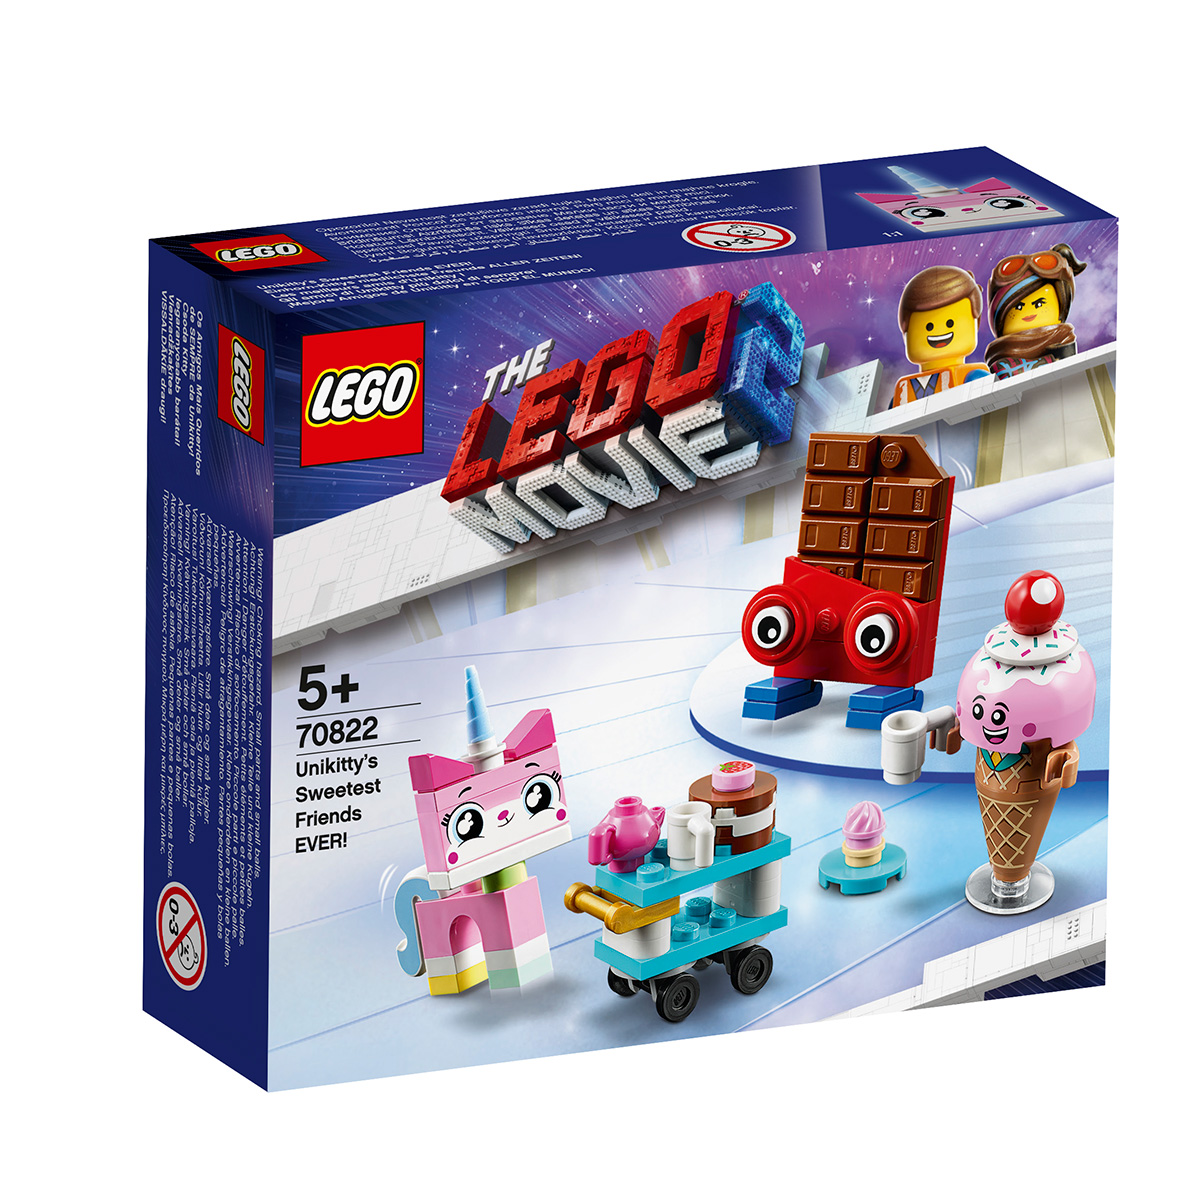 The LEGO Movie 2 Building Sets